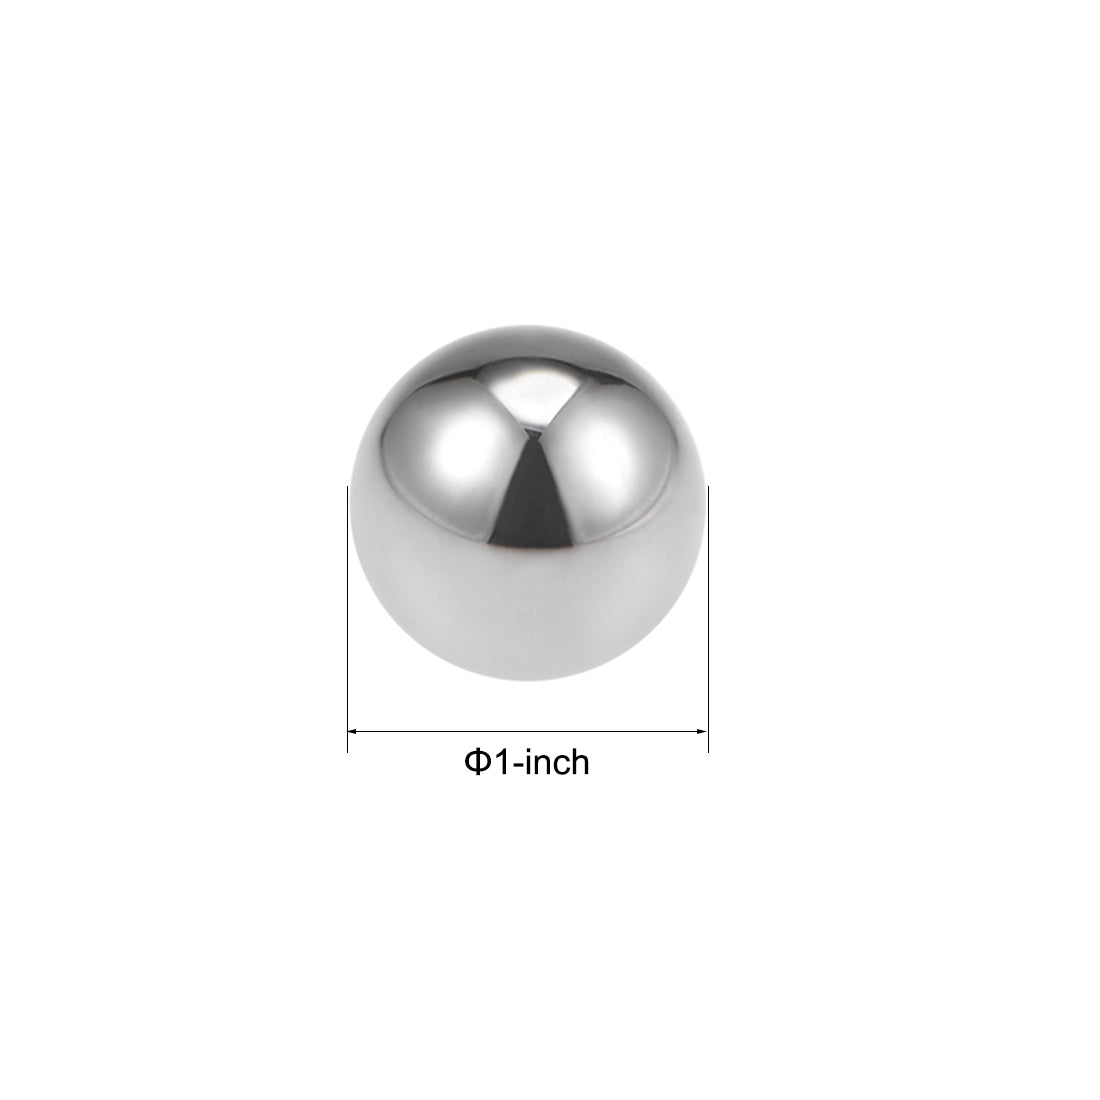 uxcell Uxcell Precision Balls 1" Solid Chrome Steel G25 for Ball Bearing Wheel 5pcs